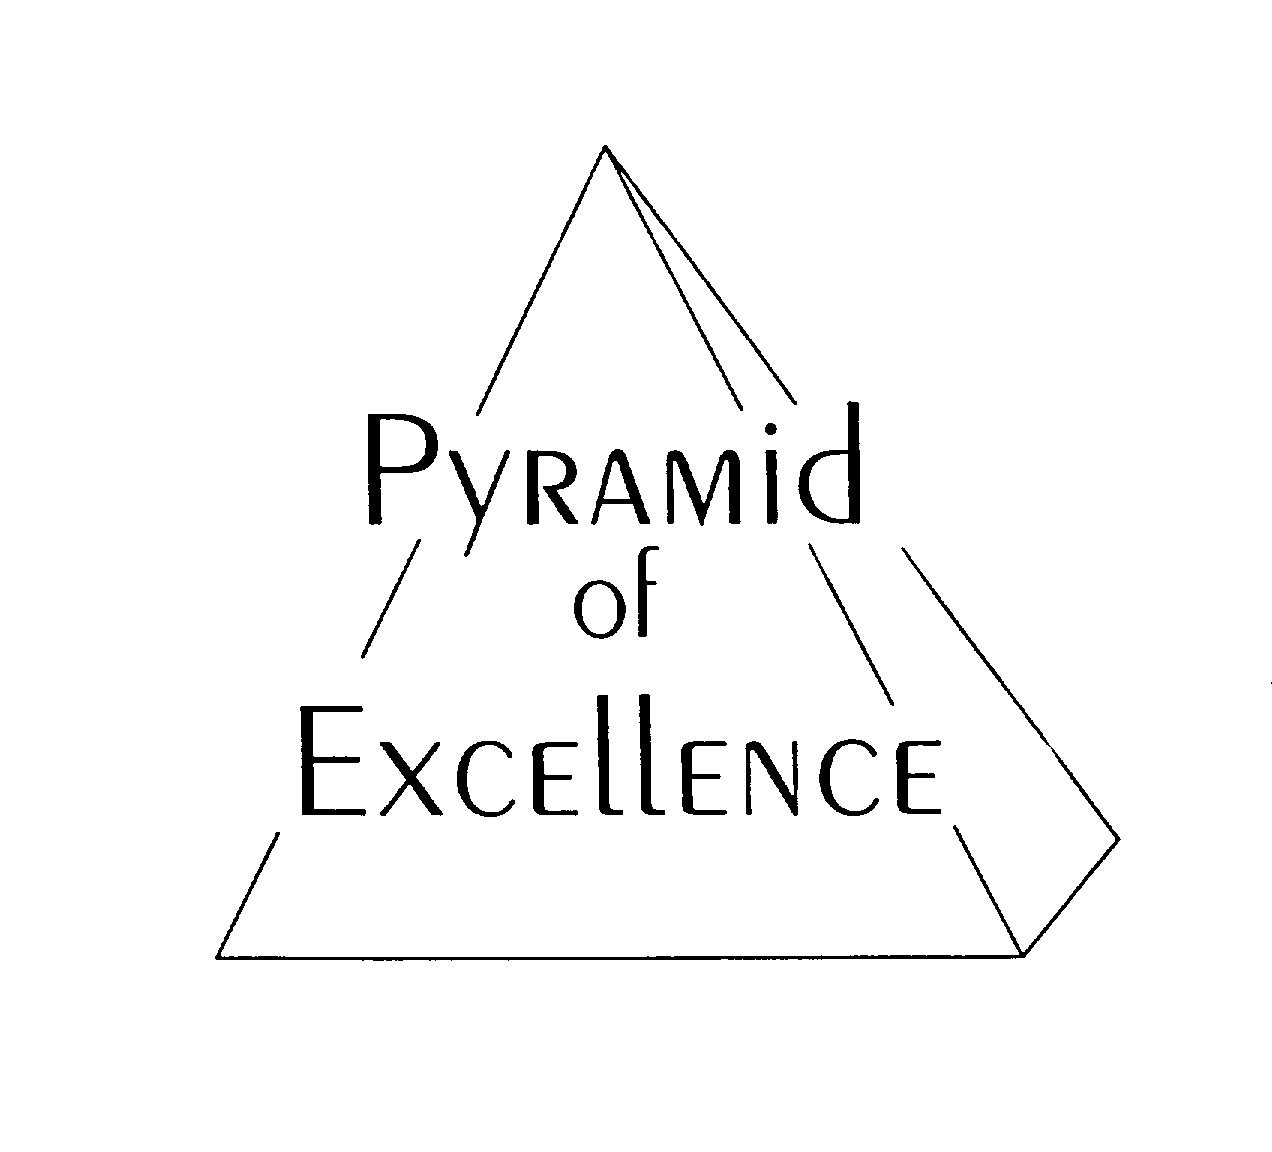  PYRAMID OF EXCELLENCE